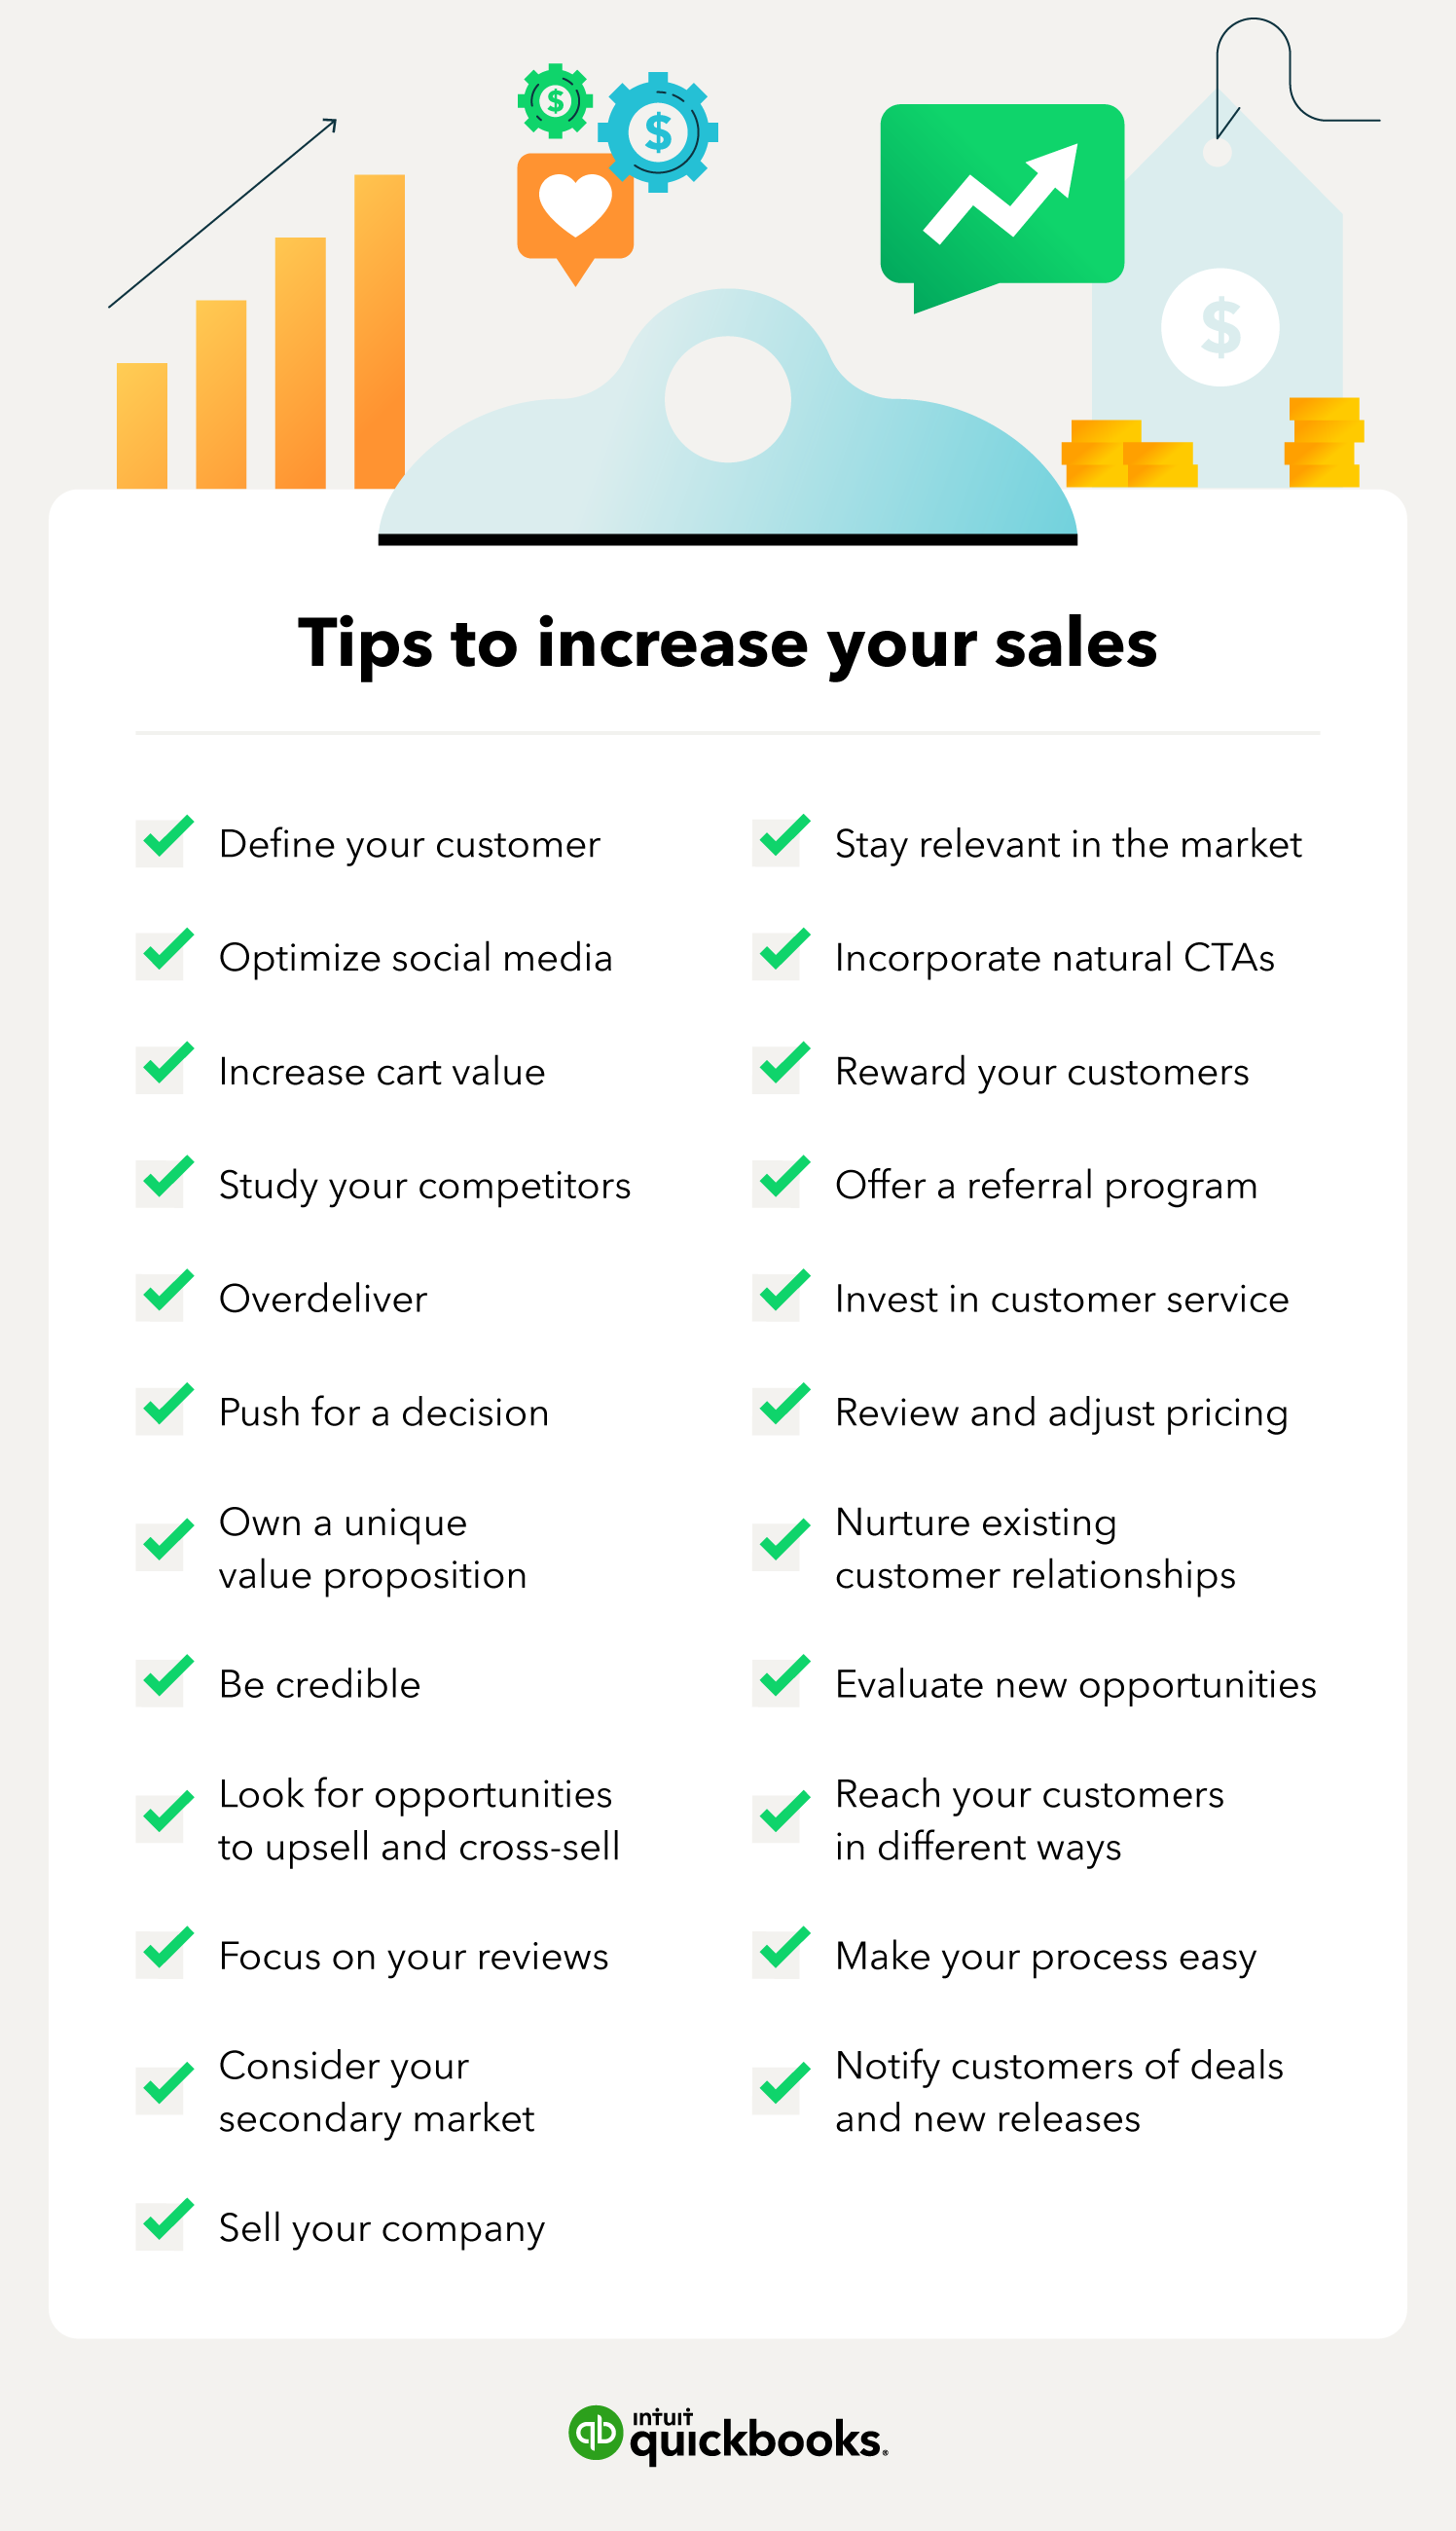 Relationship Selling: 11 Tips to Sell Better and Close More Sales